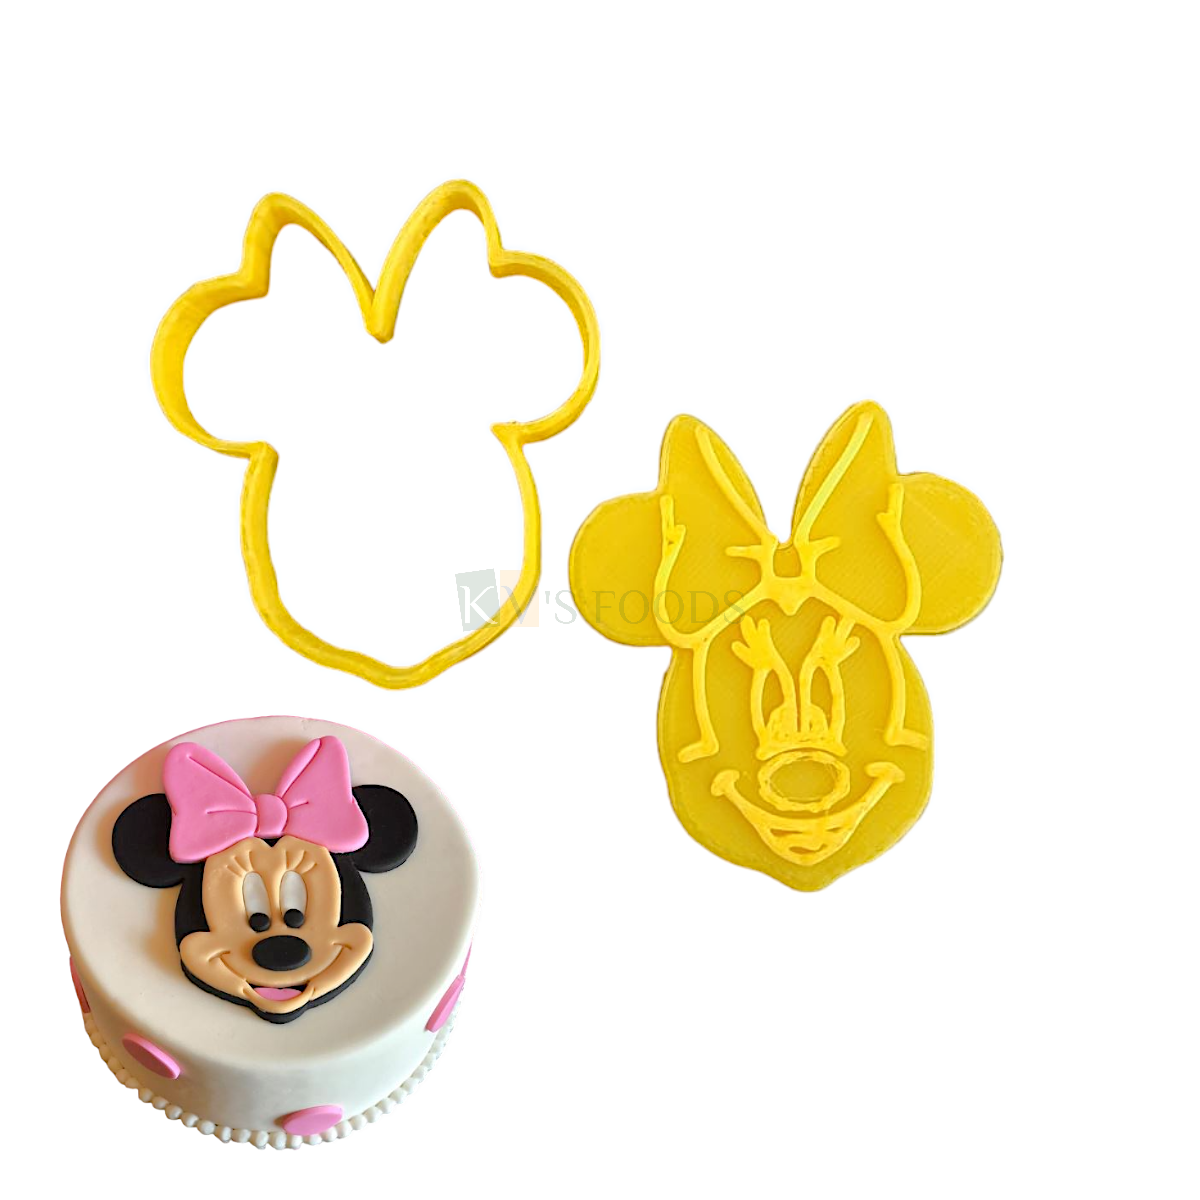 2 PCS Yellow Minnie Face Cutters Stamps, Plunger Molds Embossing Mold Printed Presses Impression, Chocolates Pancake Cookies, Kids Girls Happy Birthday Theme Baby Shower DIY Cake Cupcake Decorations